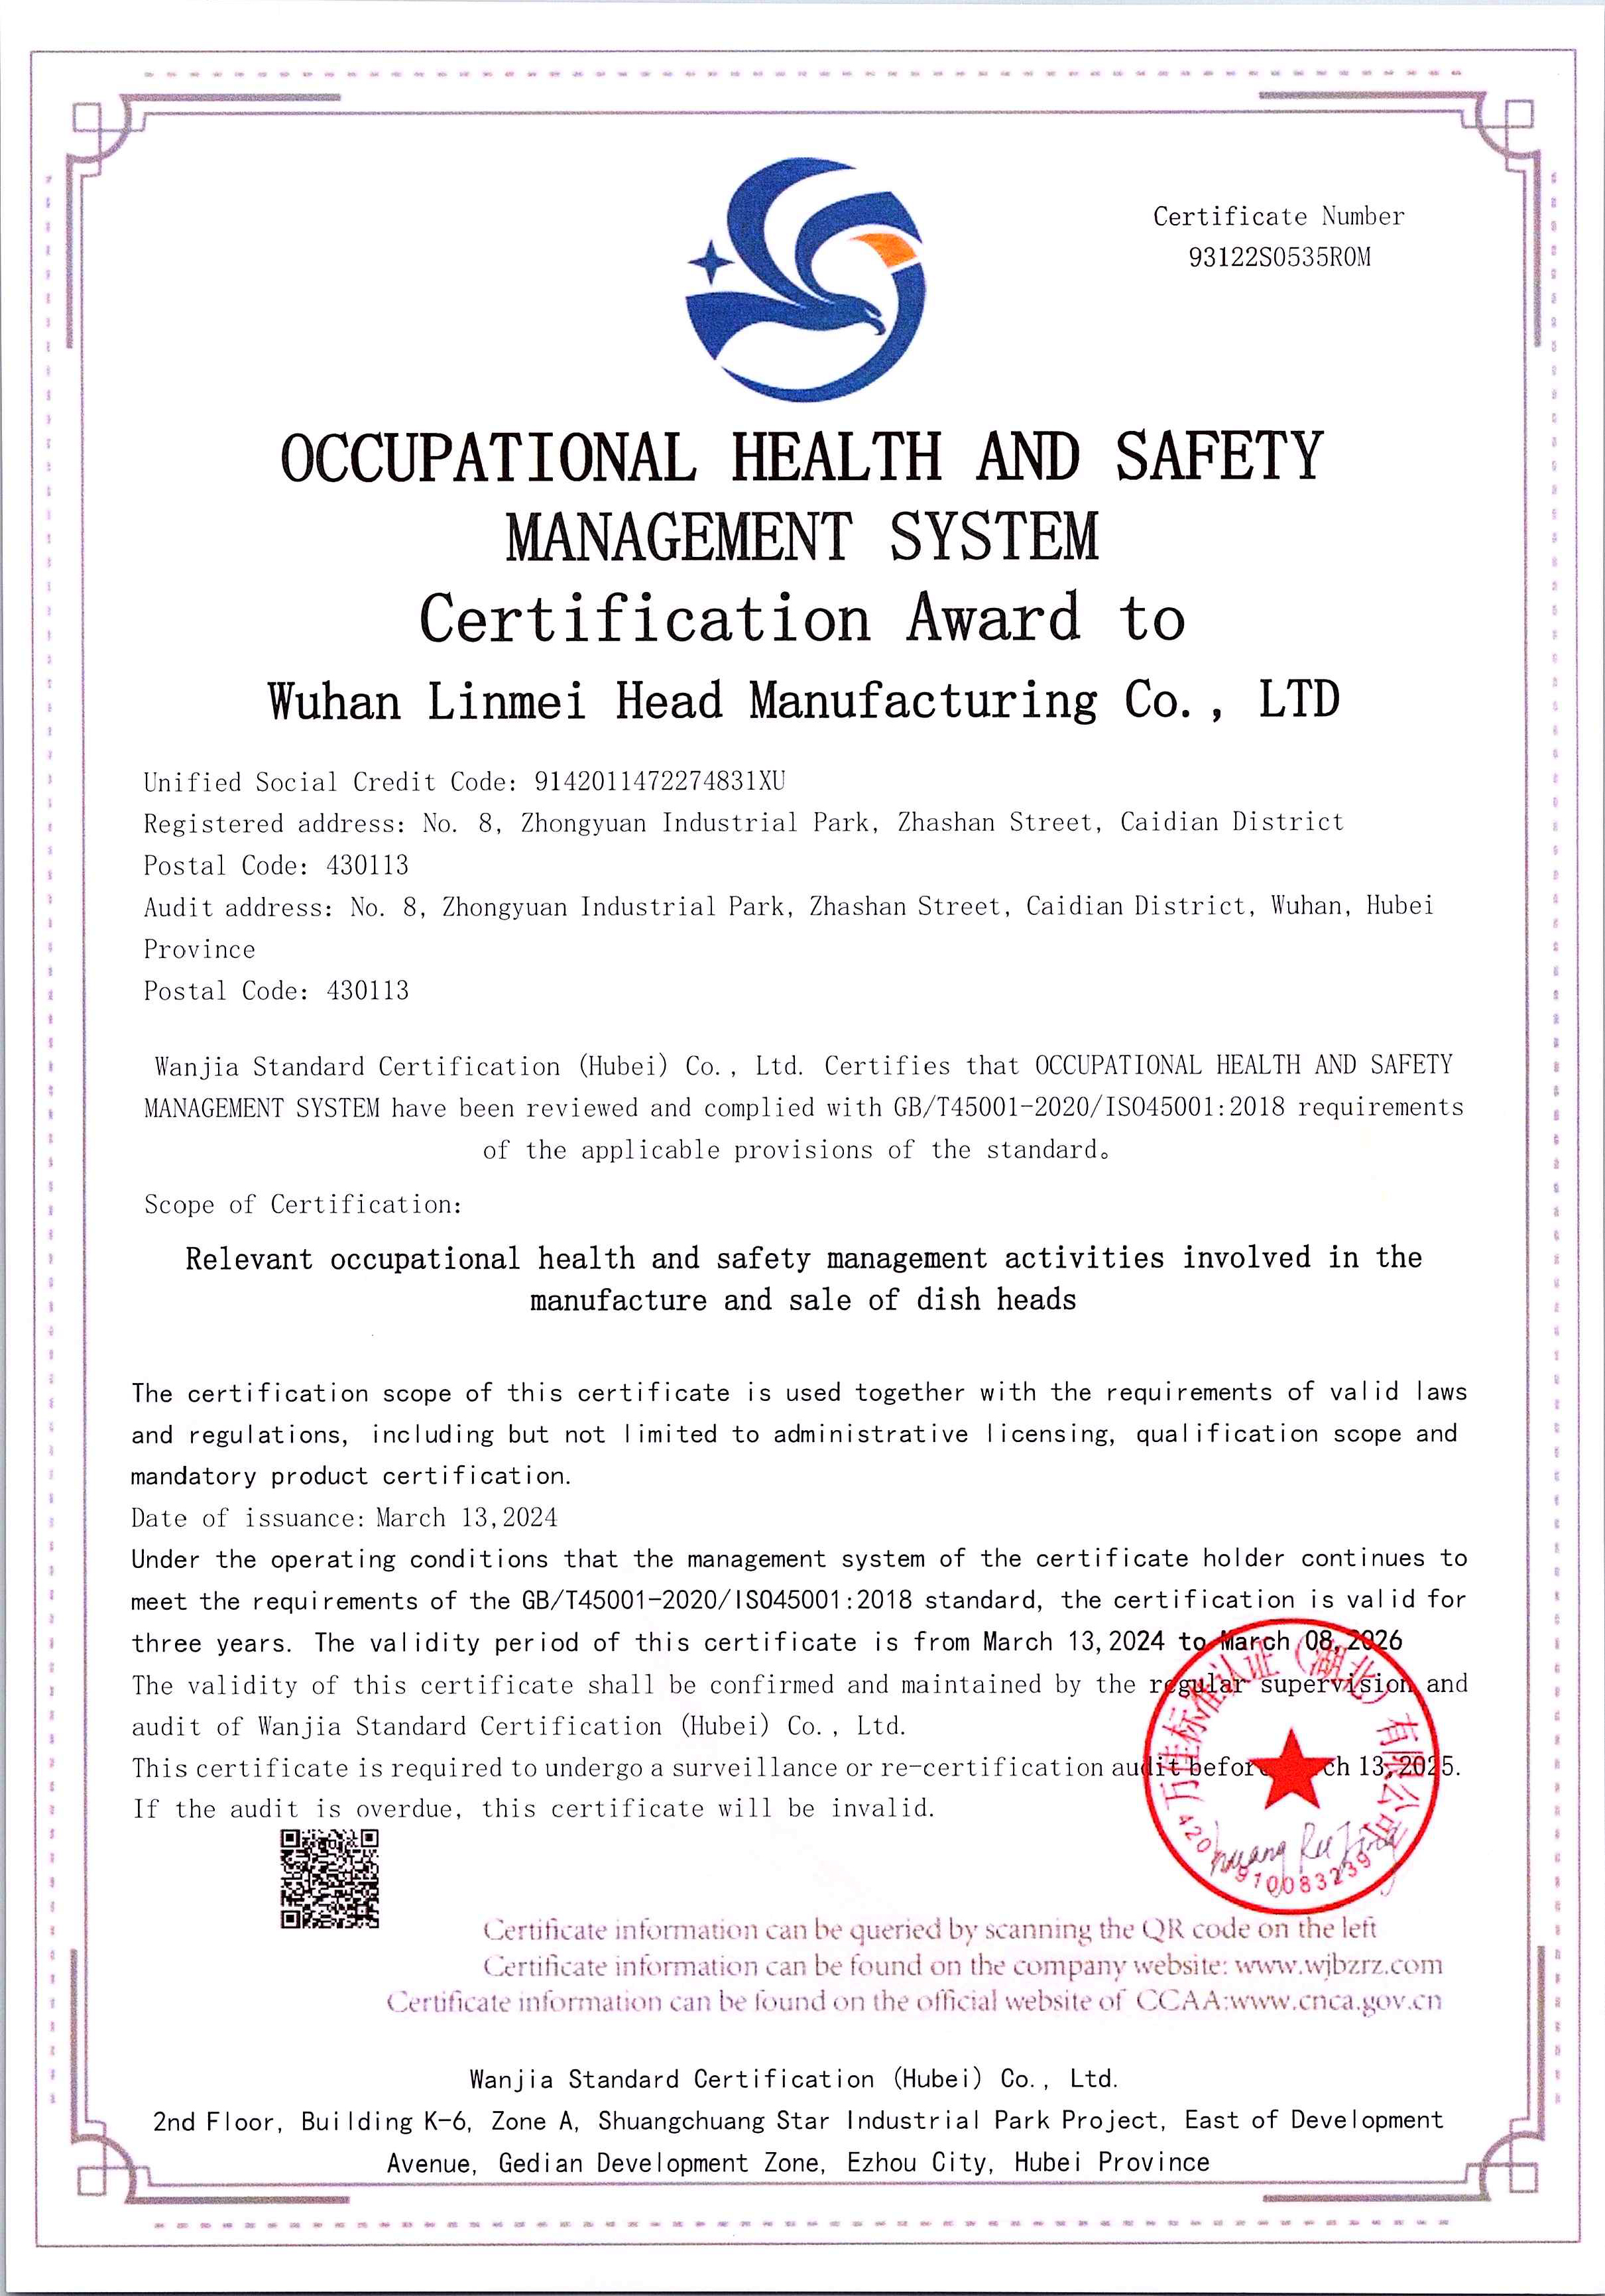 ISO14001:2015
Scope of Certification:
Relevant occupational health and safety management activities involved in the manufacture and sale of dish heads